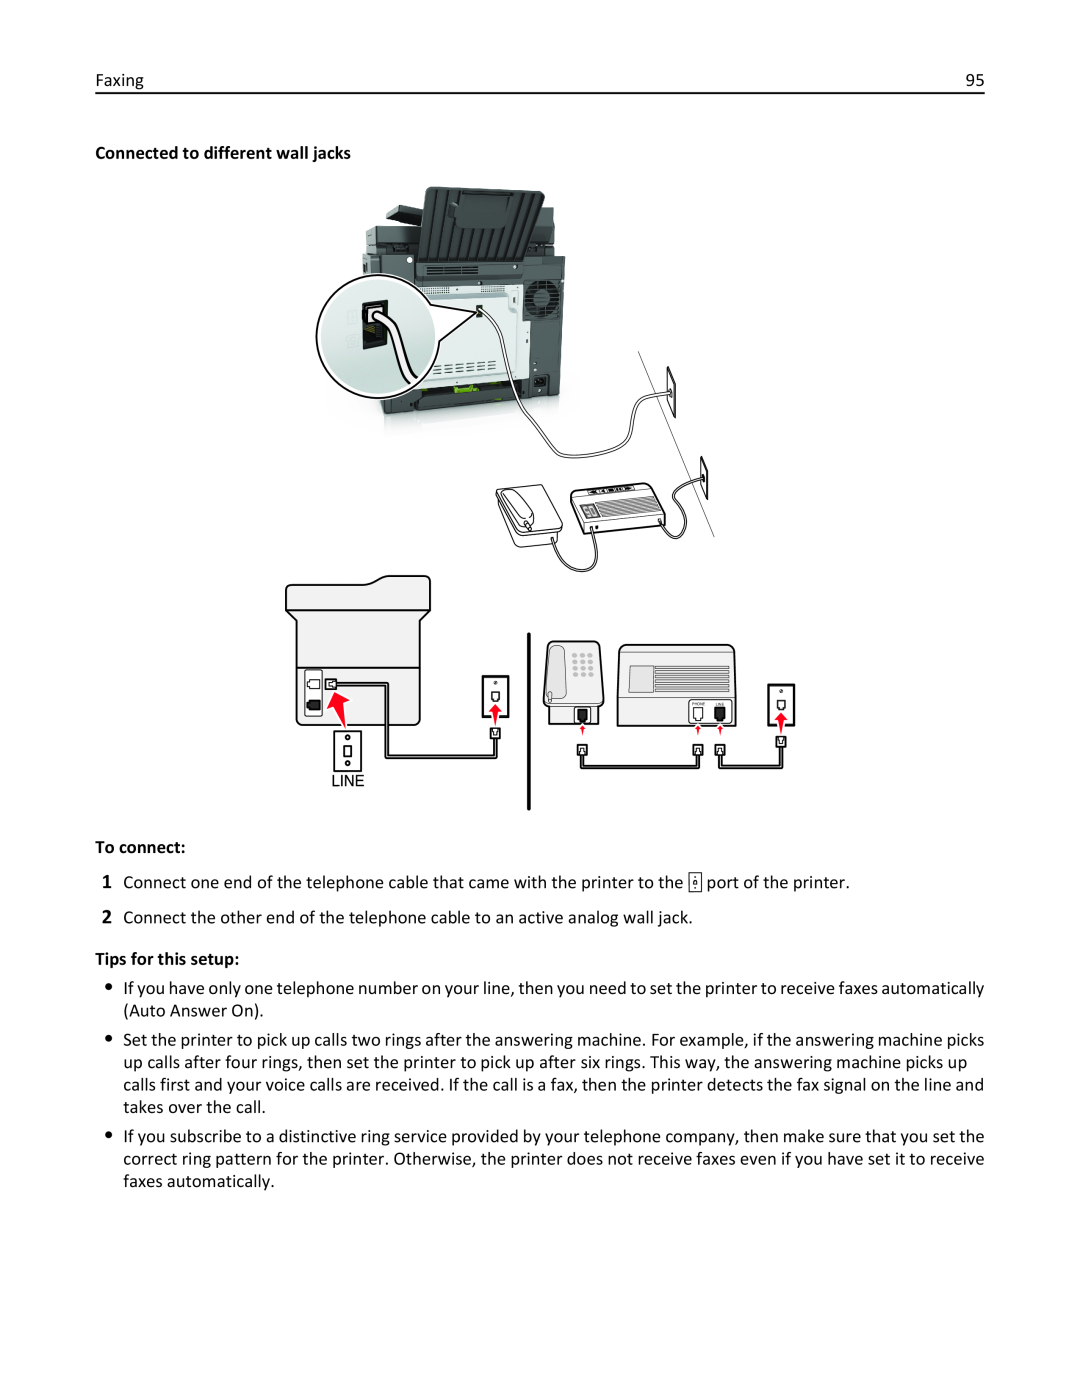 Lexmark 436 manual Connected to different wall jacks, To connect, Tips for this setup 